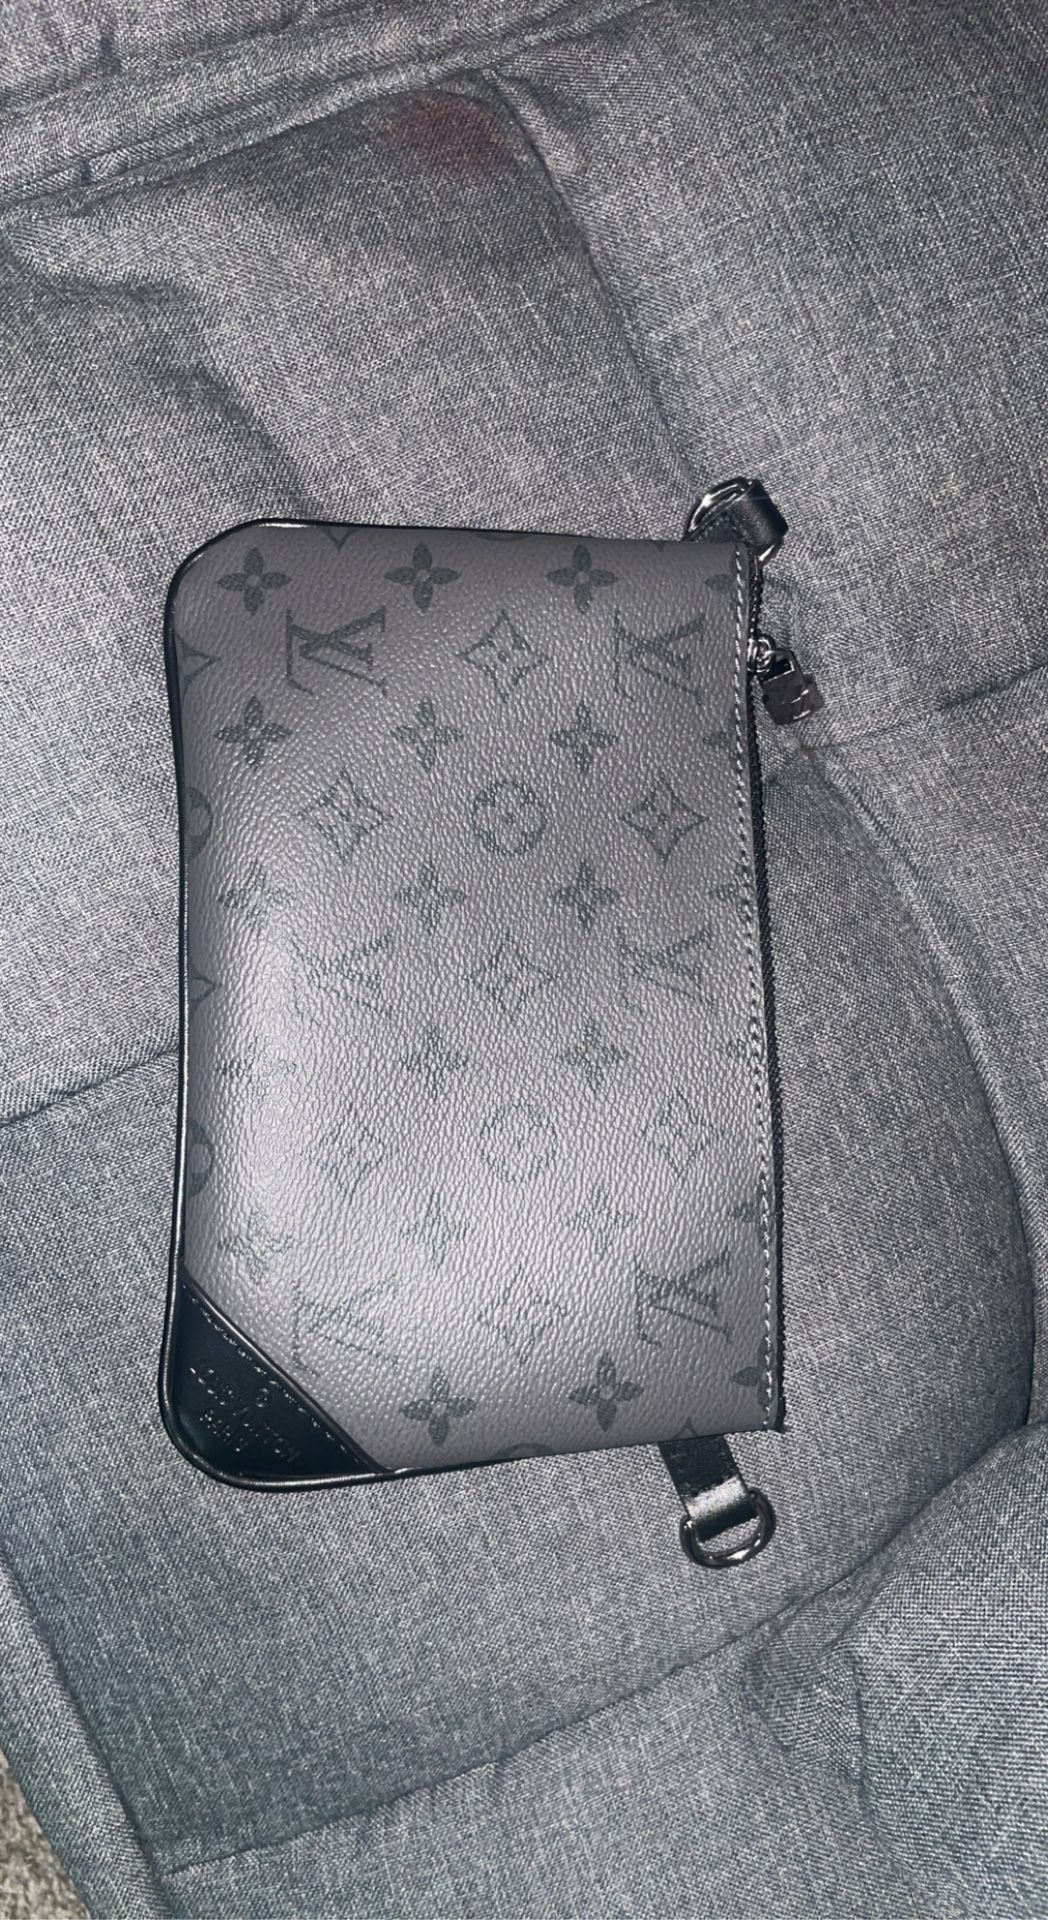 Louis Vuitton Scala Mini Pouch Bags for Sale in Chicago, IL - OfferUp